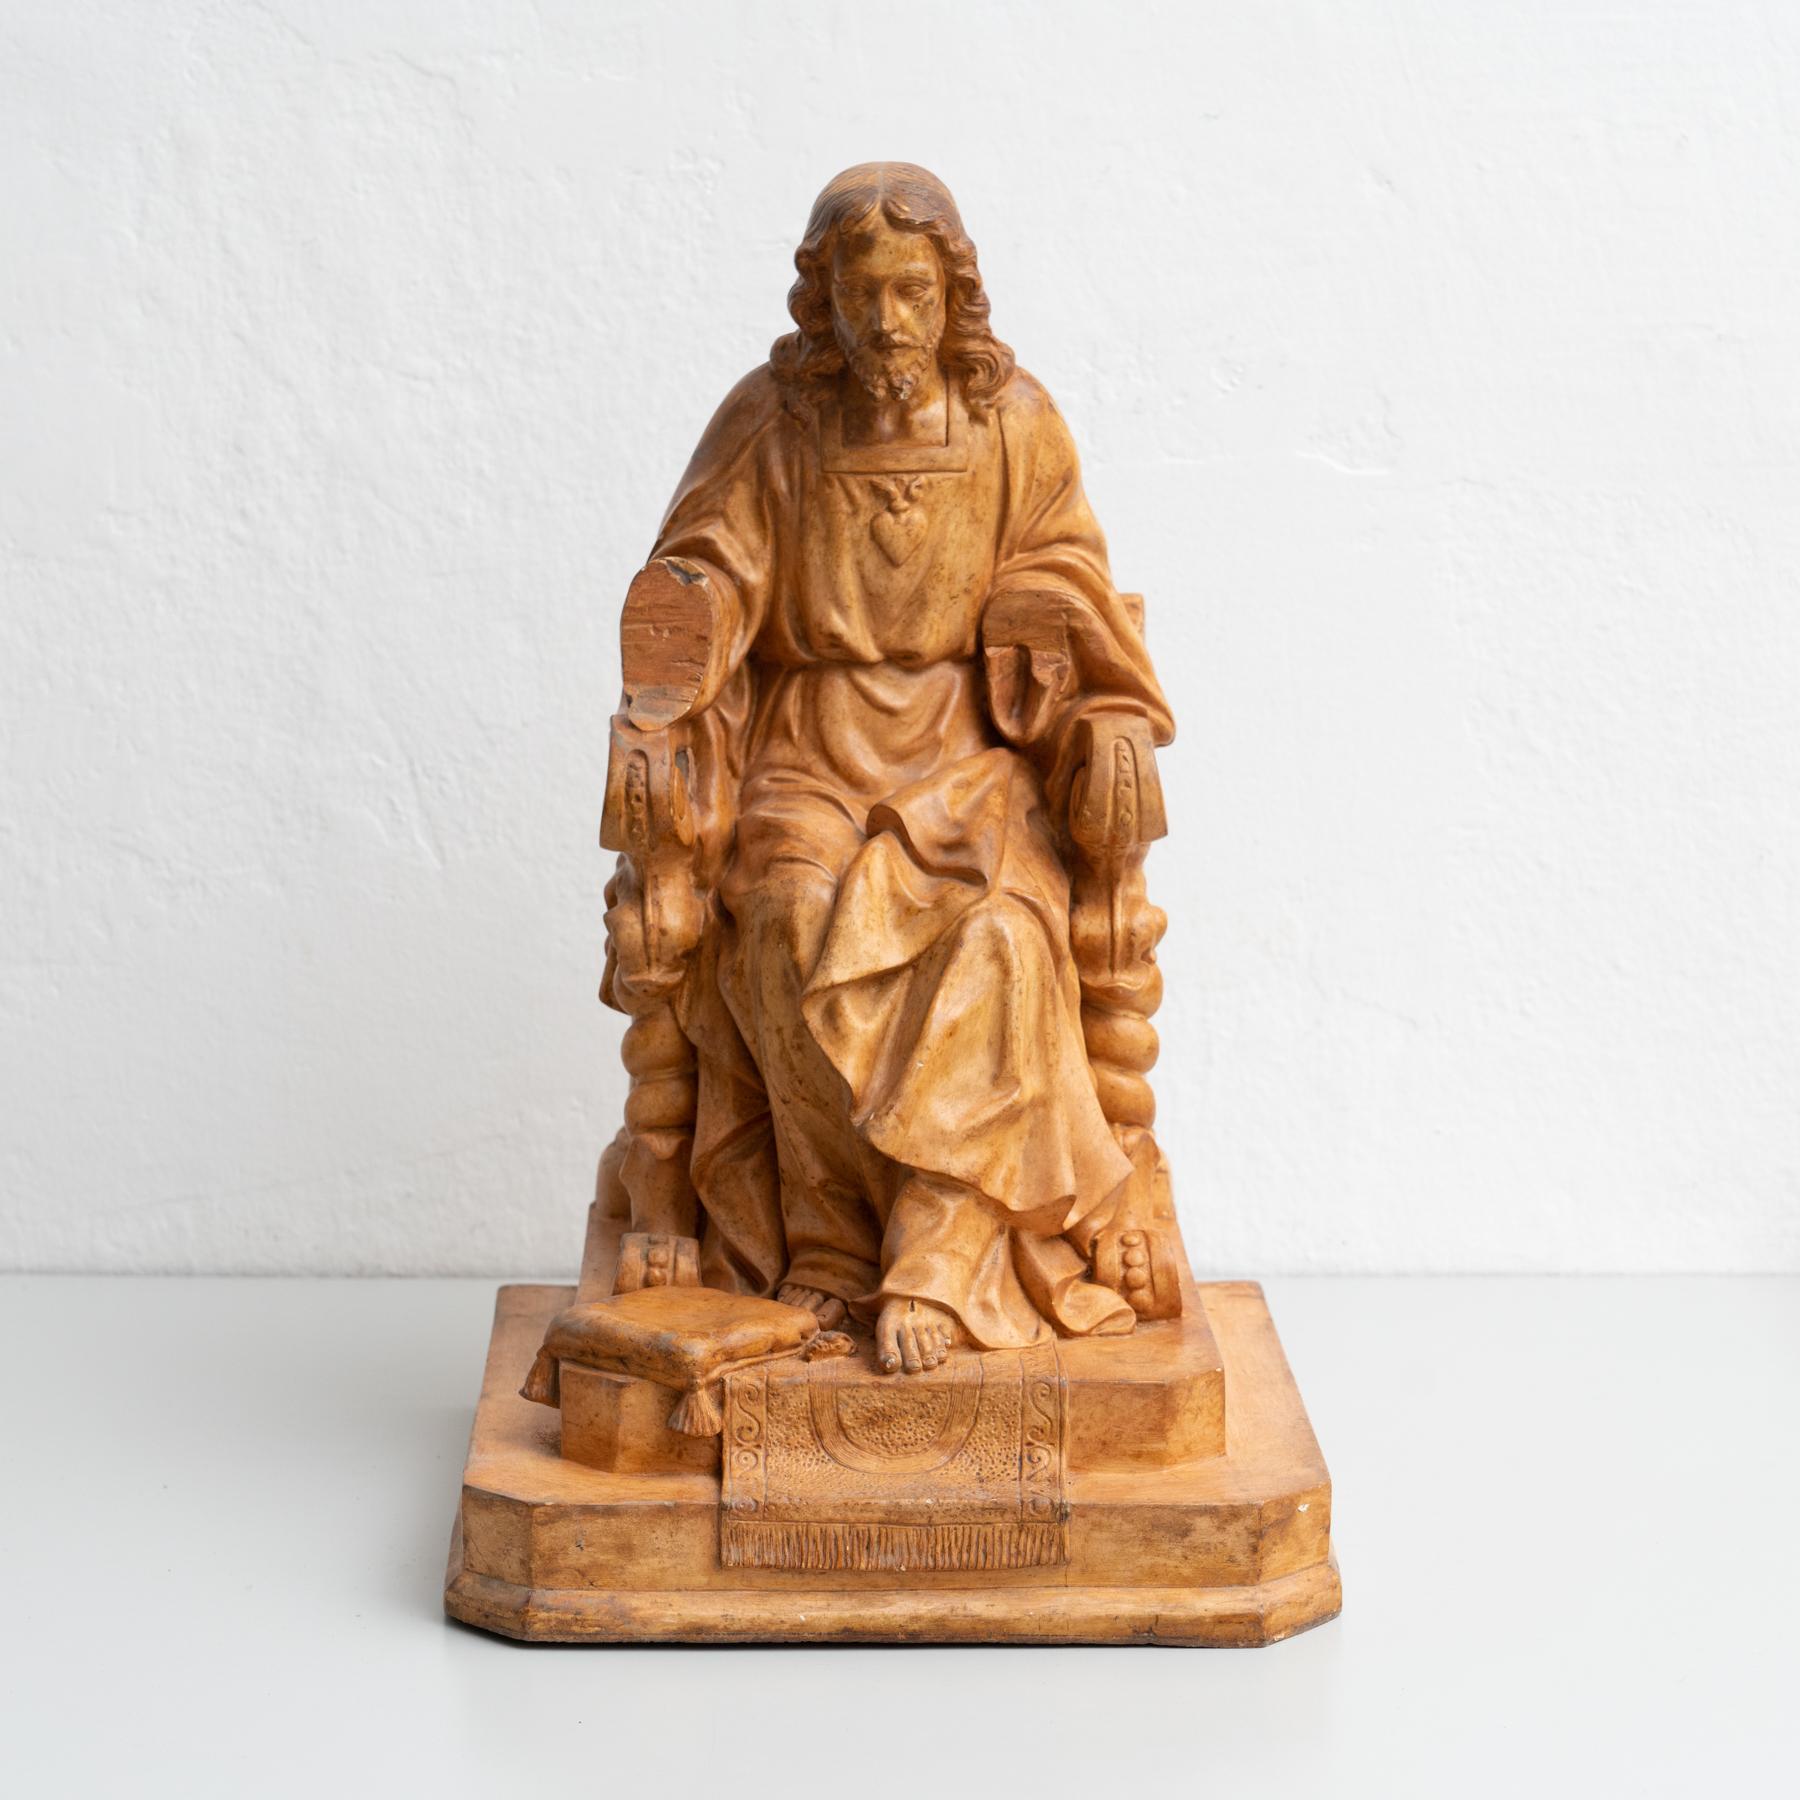 Mid-20th century turned Jesus Christ figure of made of plater.

Made in Olot, Spain.

In original condition, with minor wear consistent with age and use, preserving a beautiful patina.
 